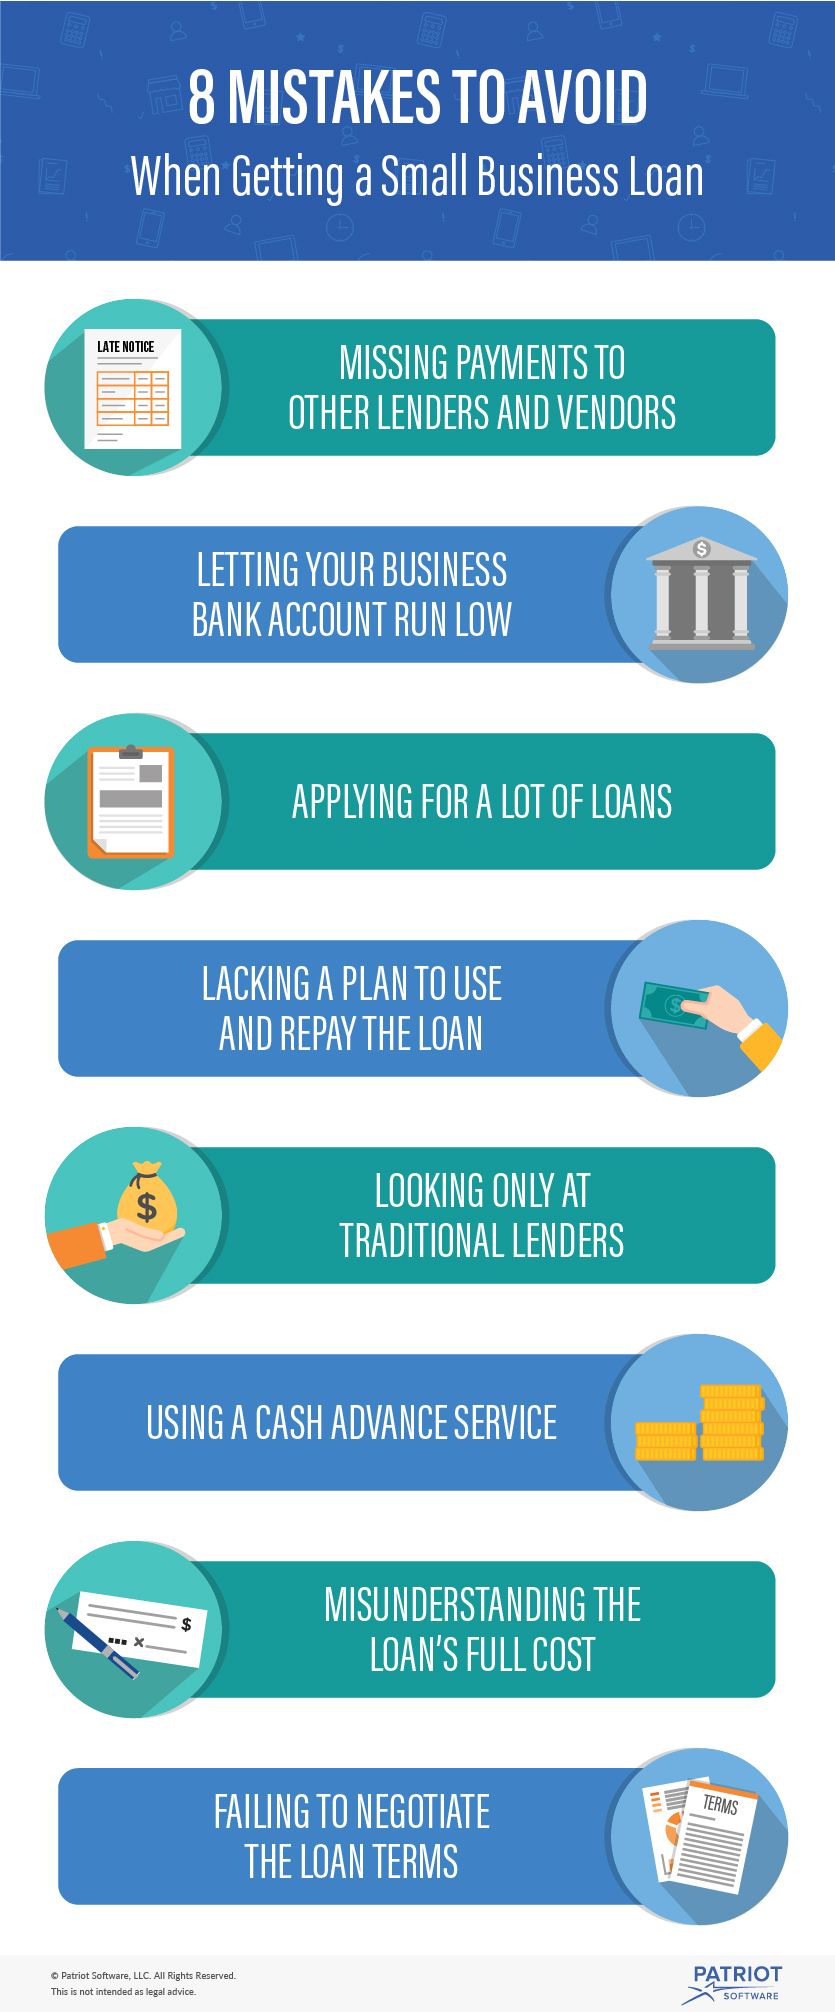 8 Mistakes to Avoid When Getting a Small Business Loan Infographic